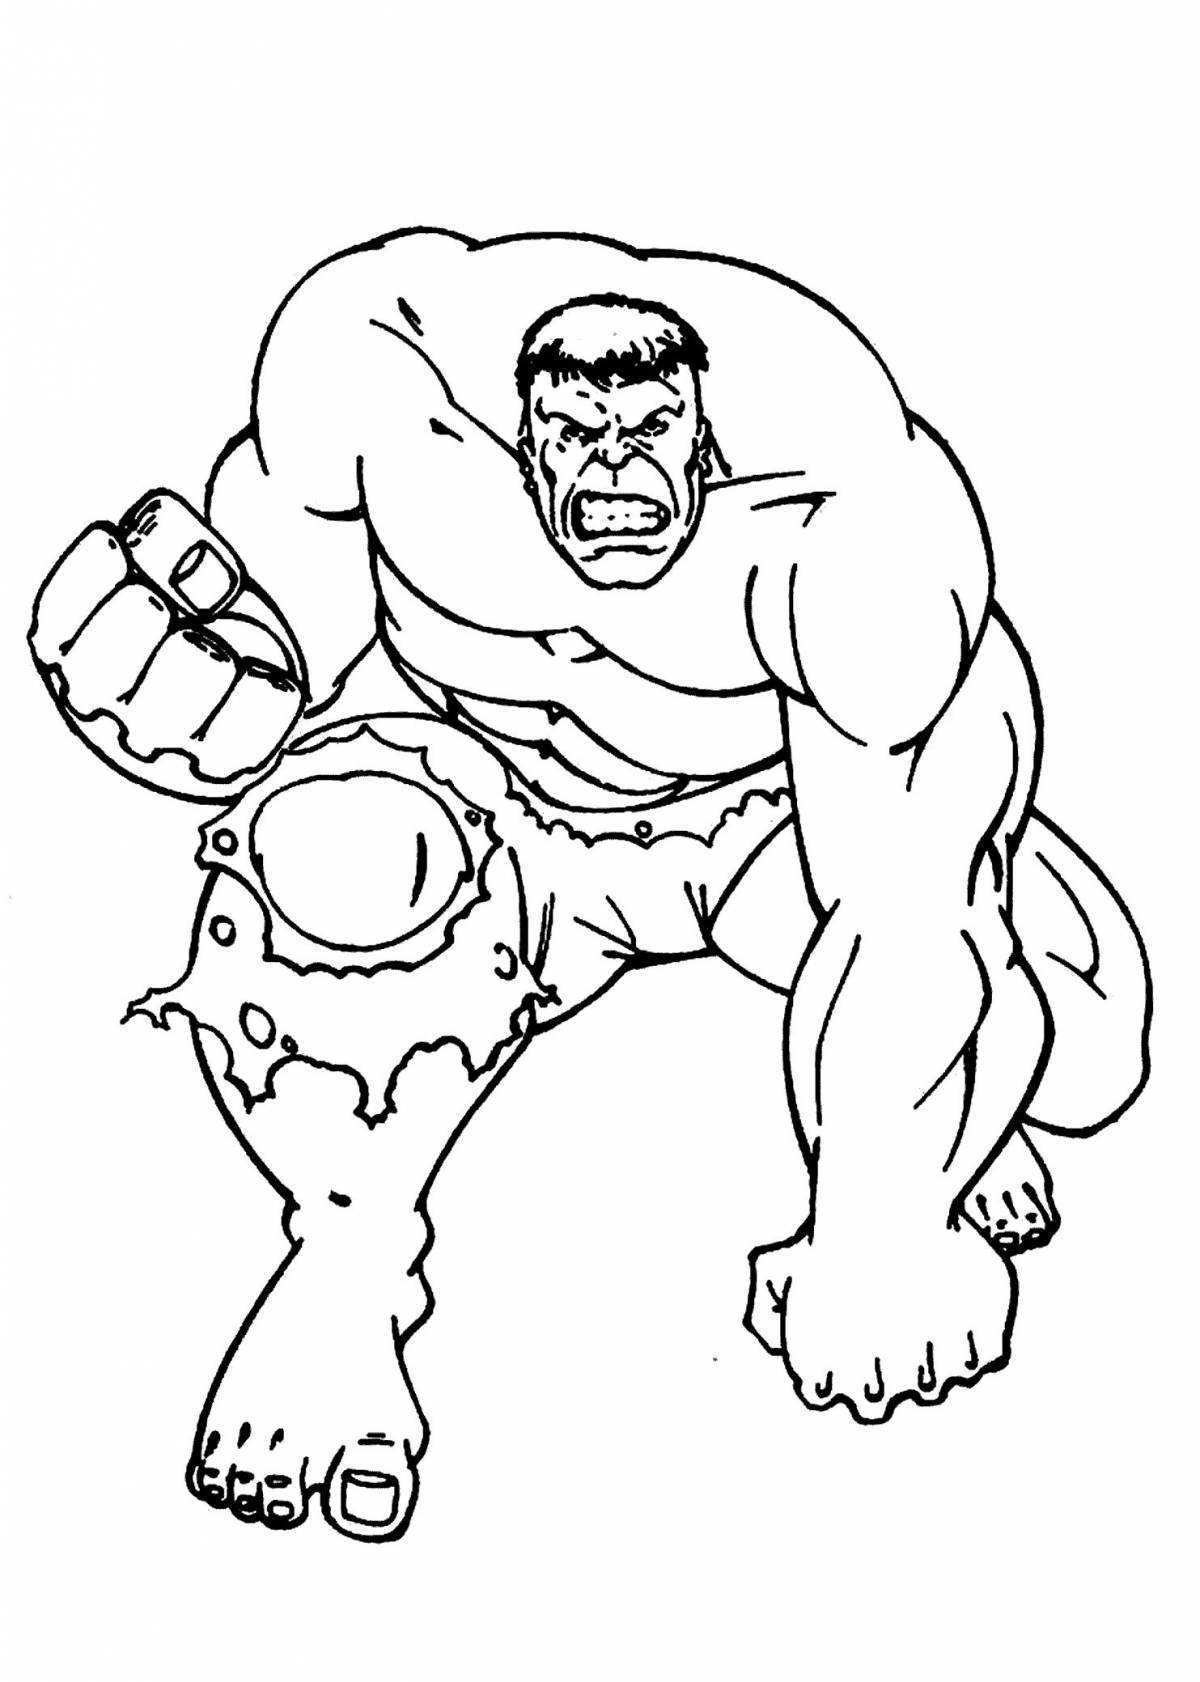 Animated Hulk coloring book for kids 6-7 years old